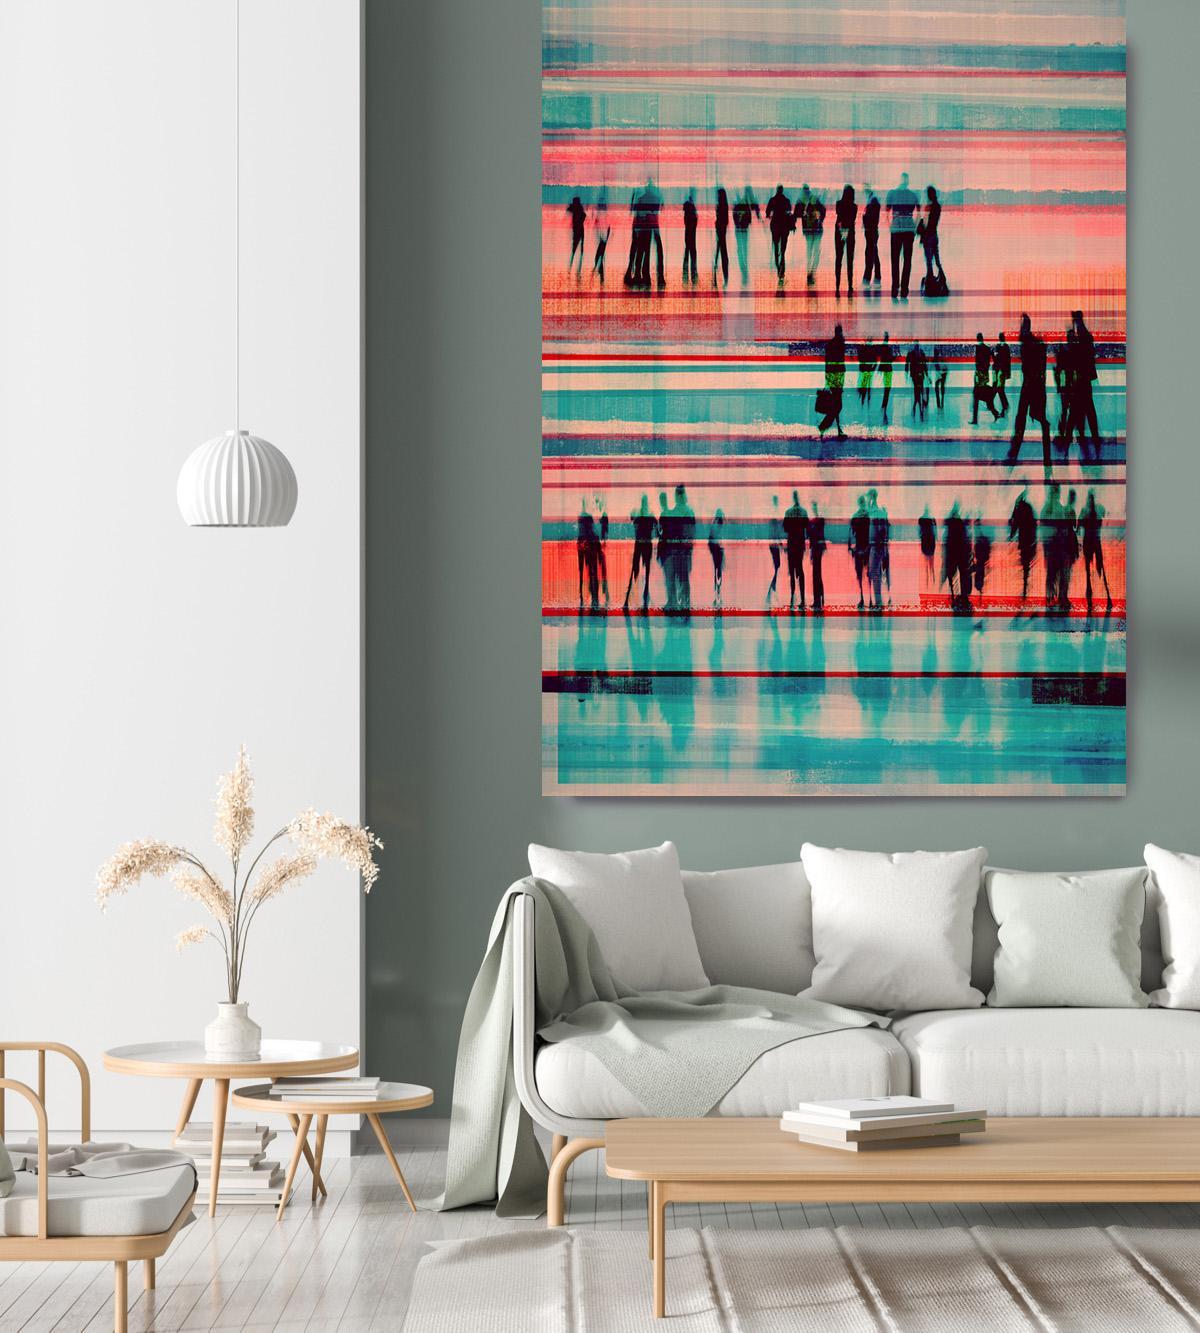 Urban Teal Coral Office Painting Mixed Media auf Leinwand 40x65" Going To Work 3-2